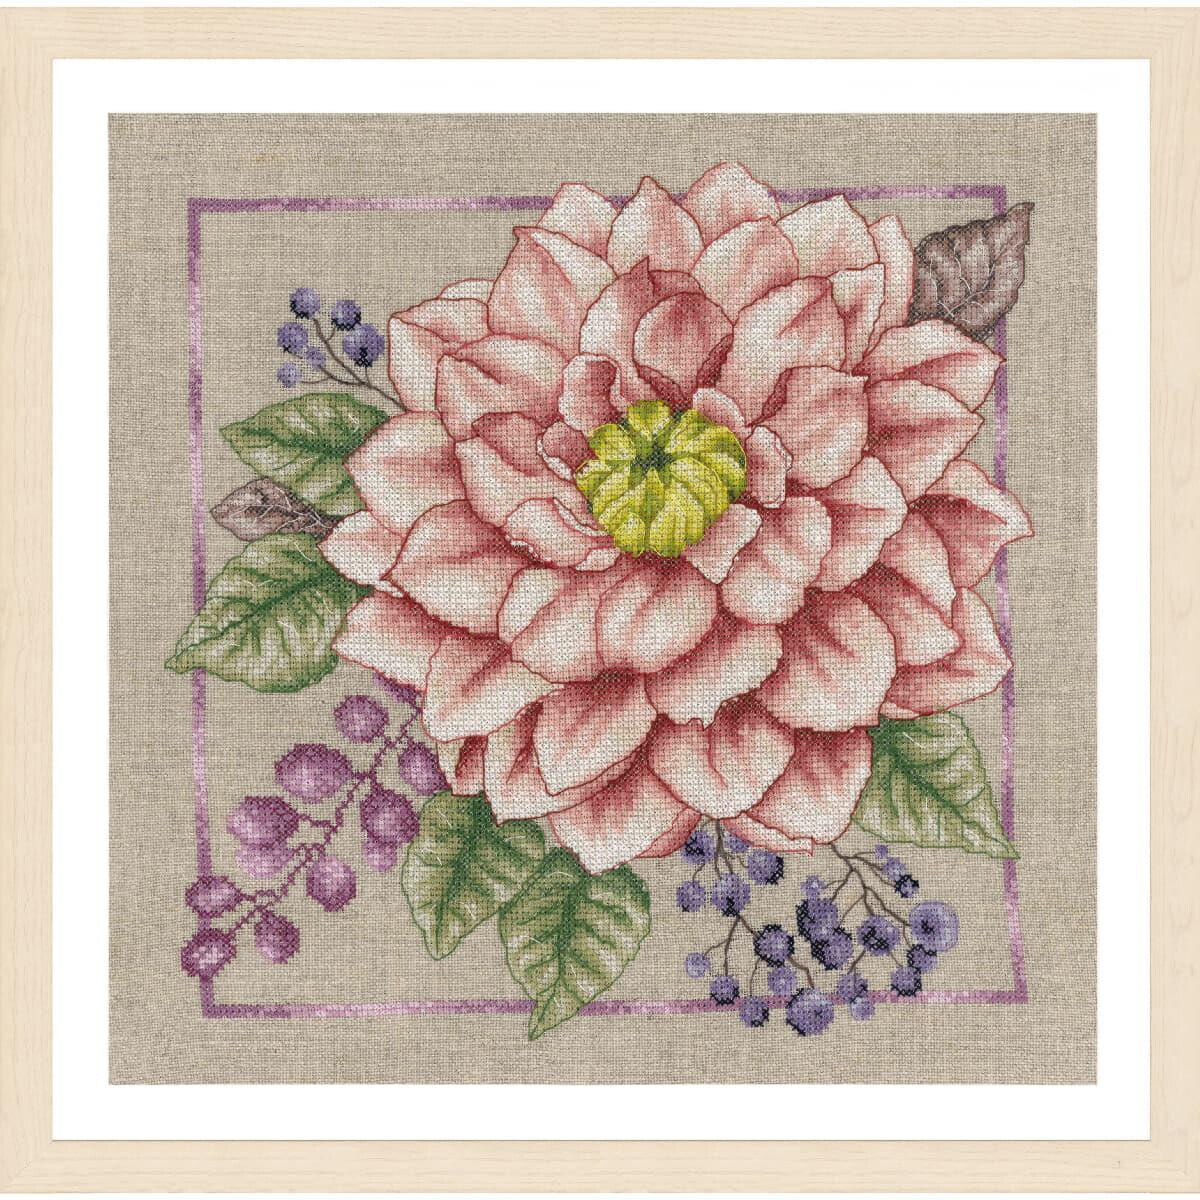 An embroidery pack from Lanarte with a large pink flower...